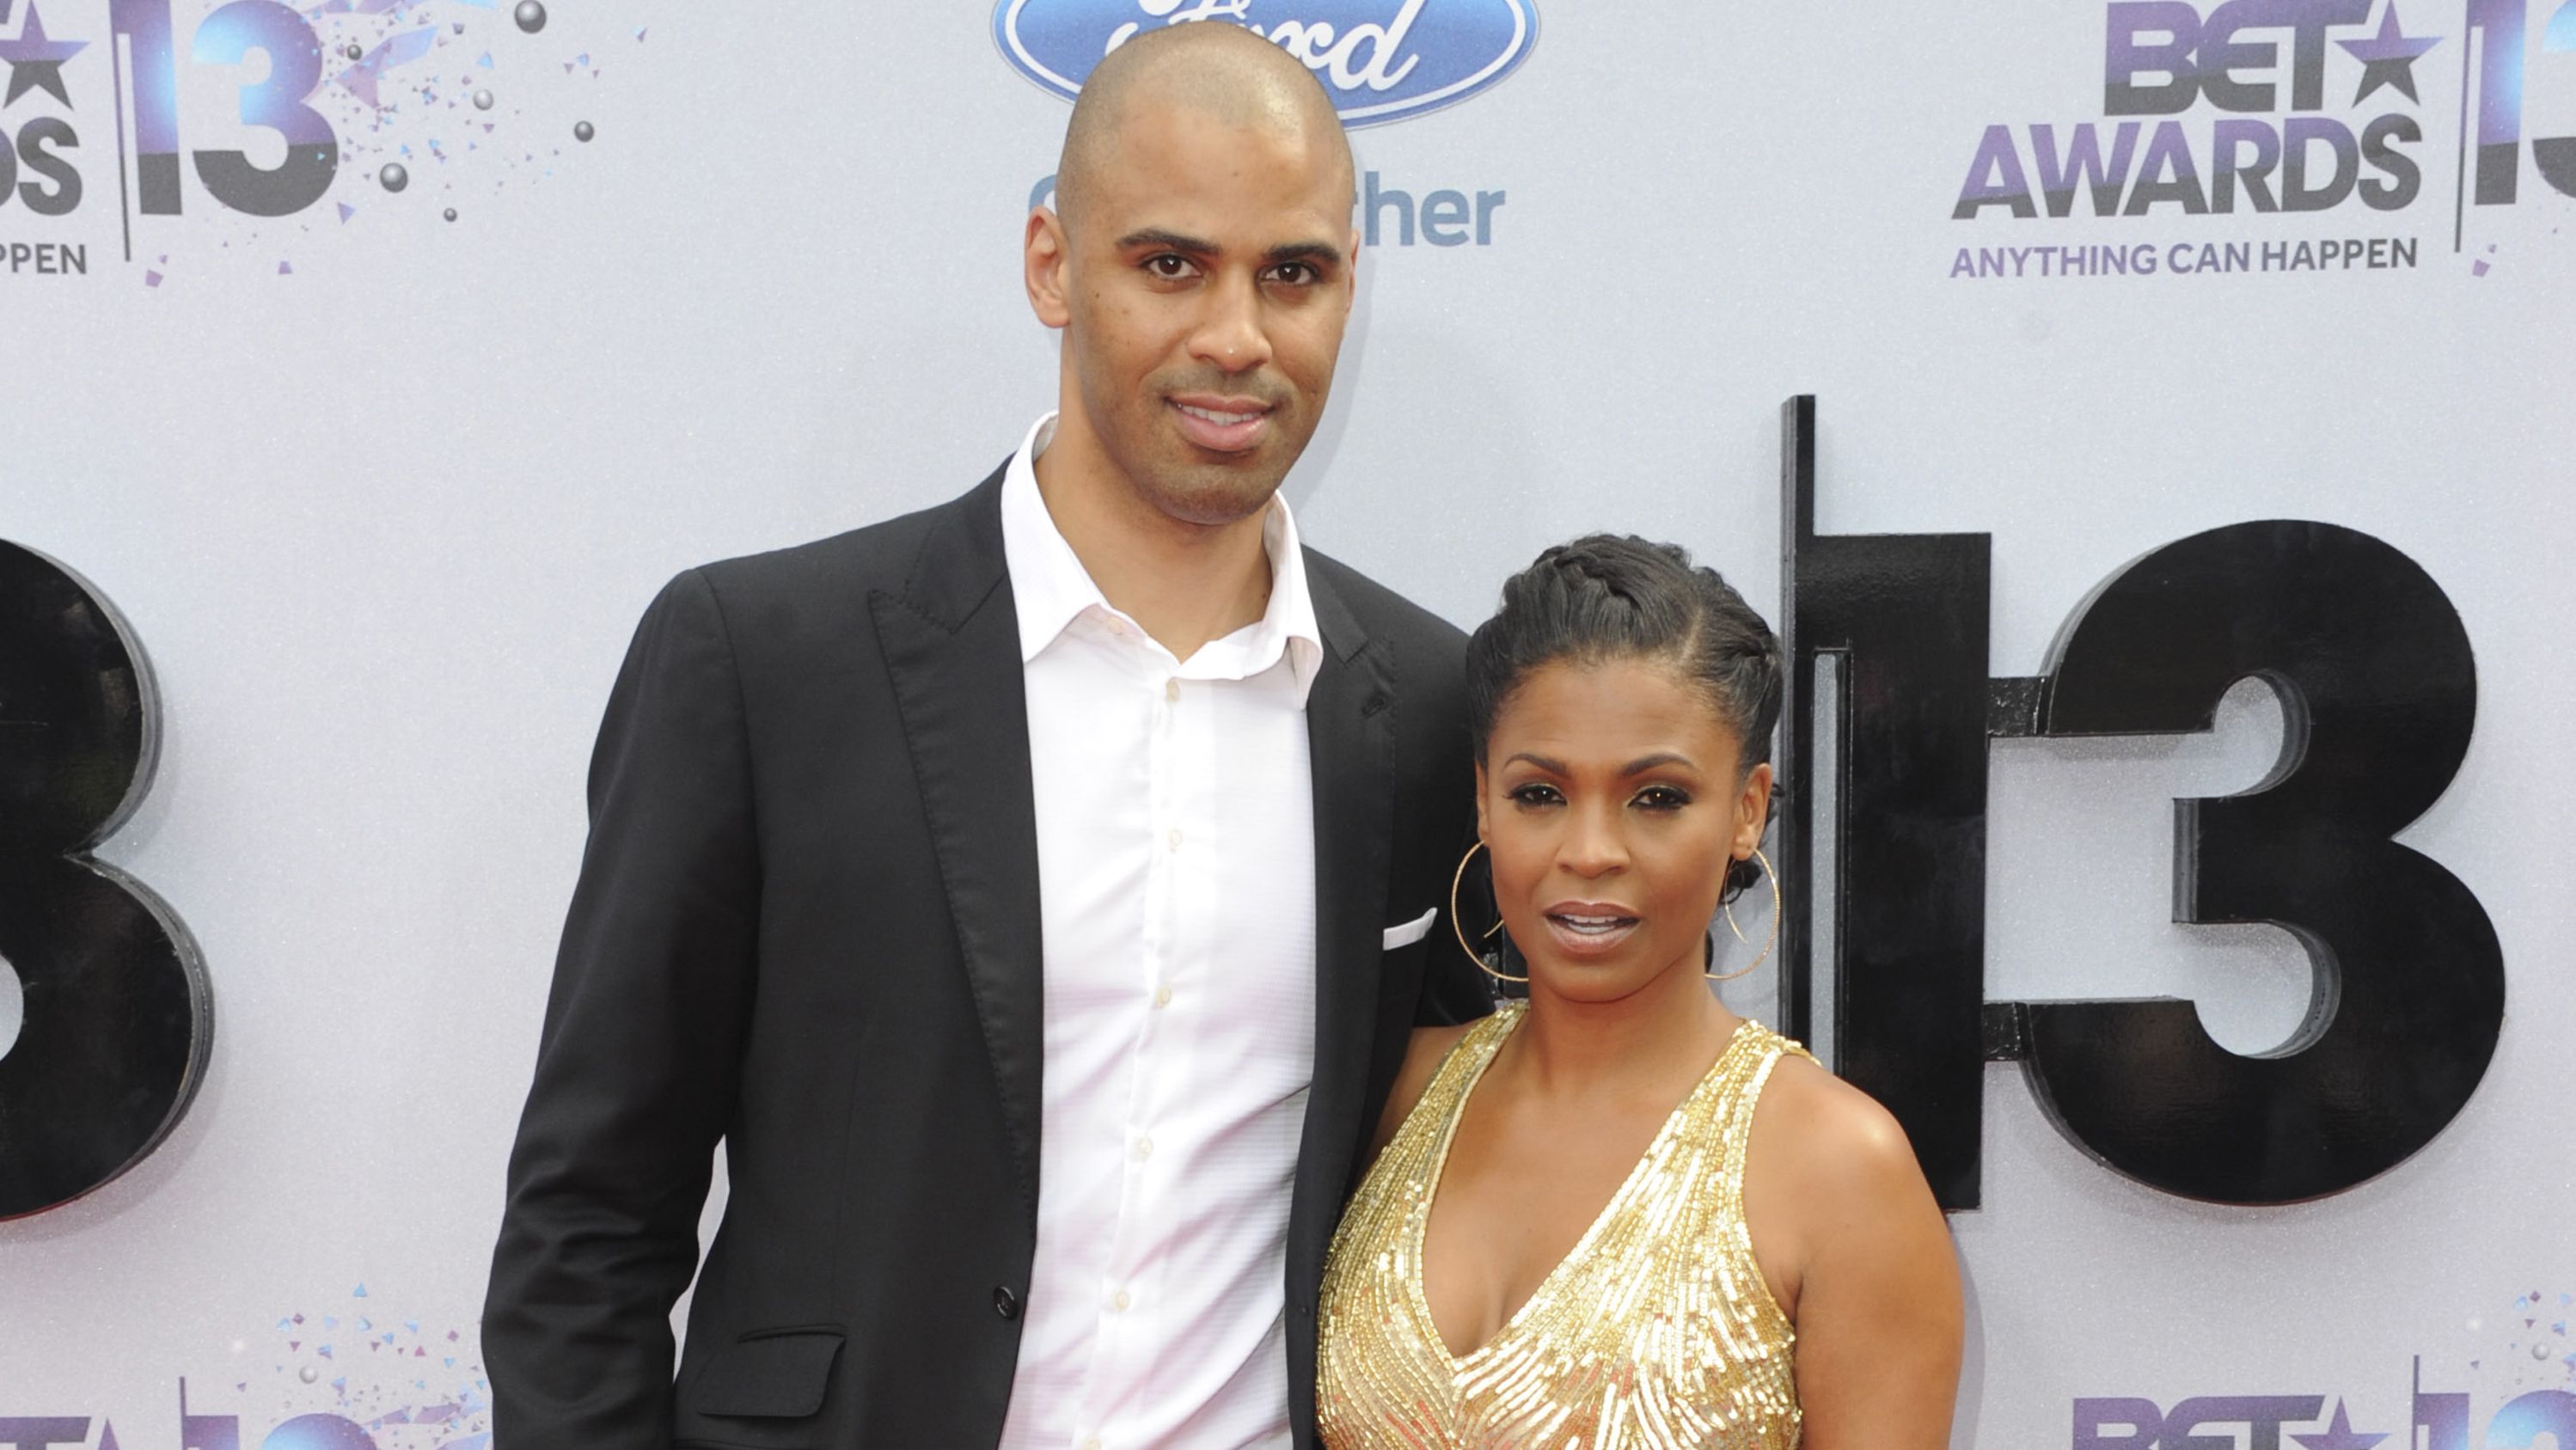 Former basketball player Ime Udoka and Nia Long attend 2013 BET Awards - Arrivals at Nokia Plaza L.A. LIVE on June 30, 2013 in Los Angeles, California.